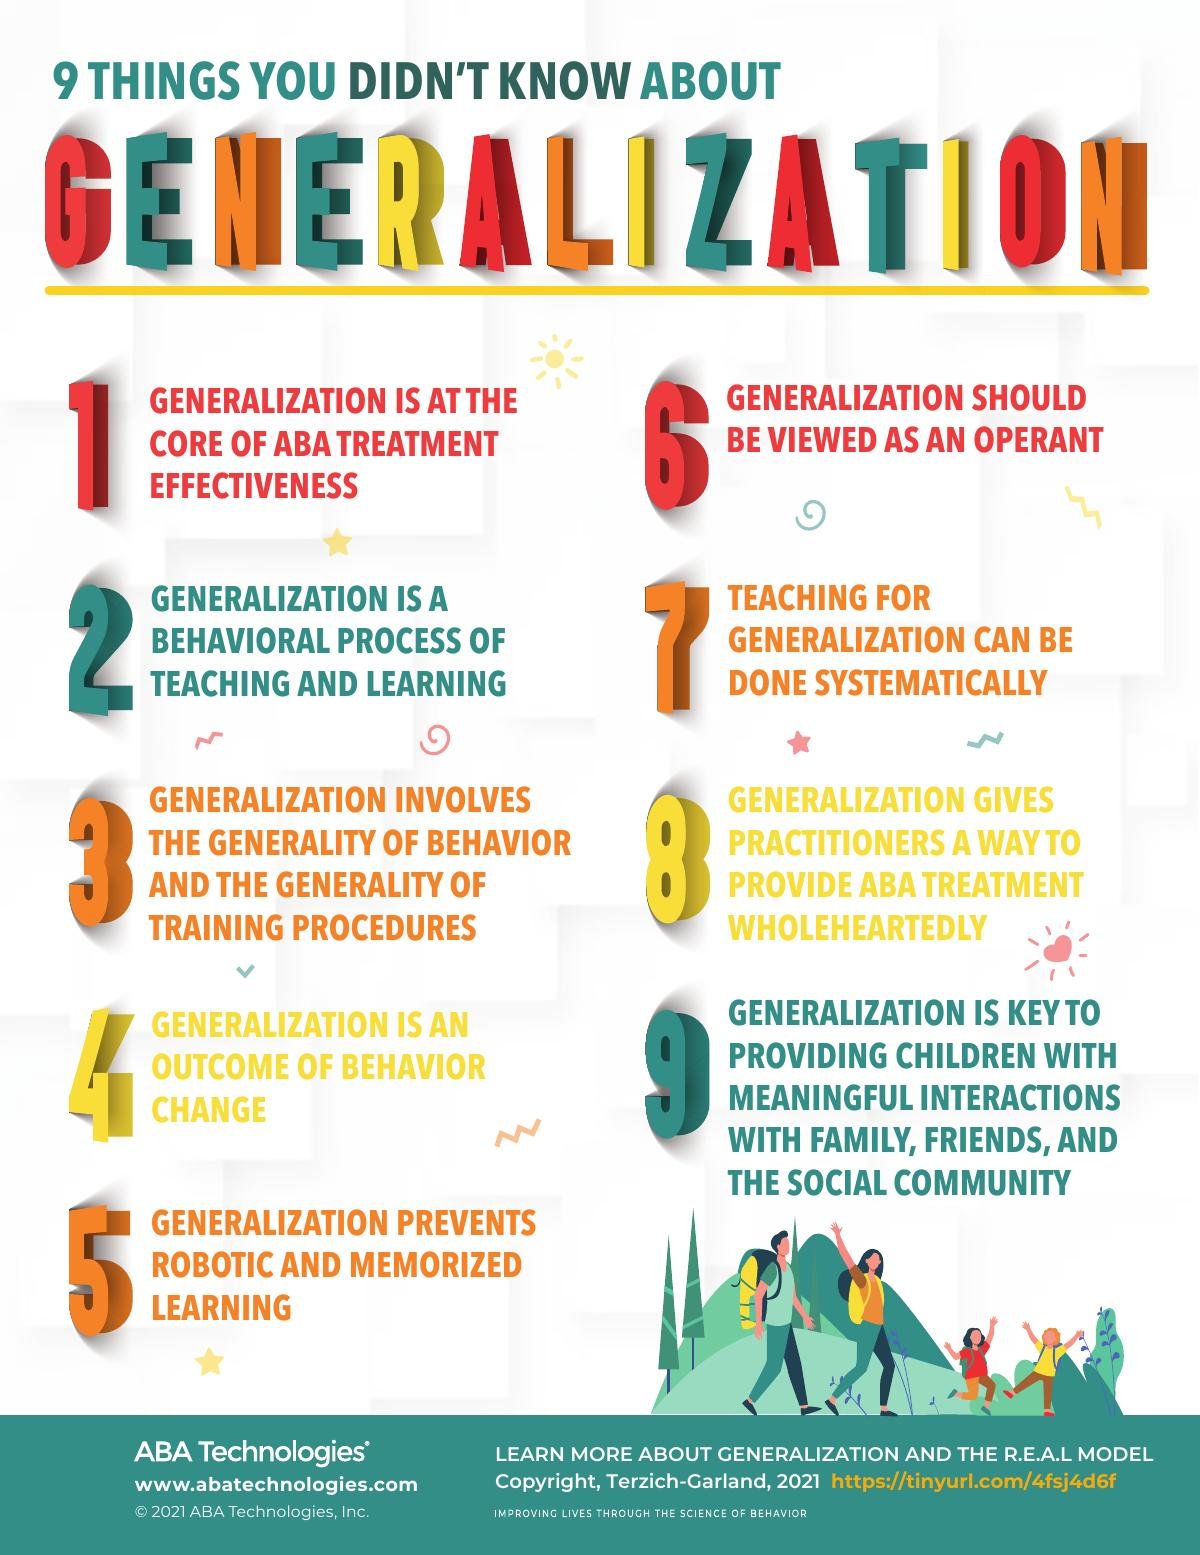 9 Things You Didn't Know About Generalization